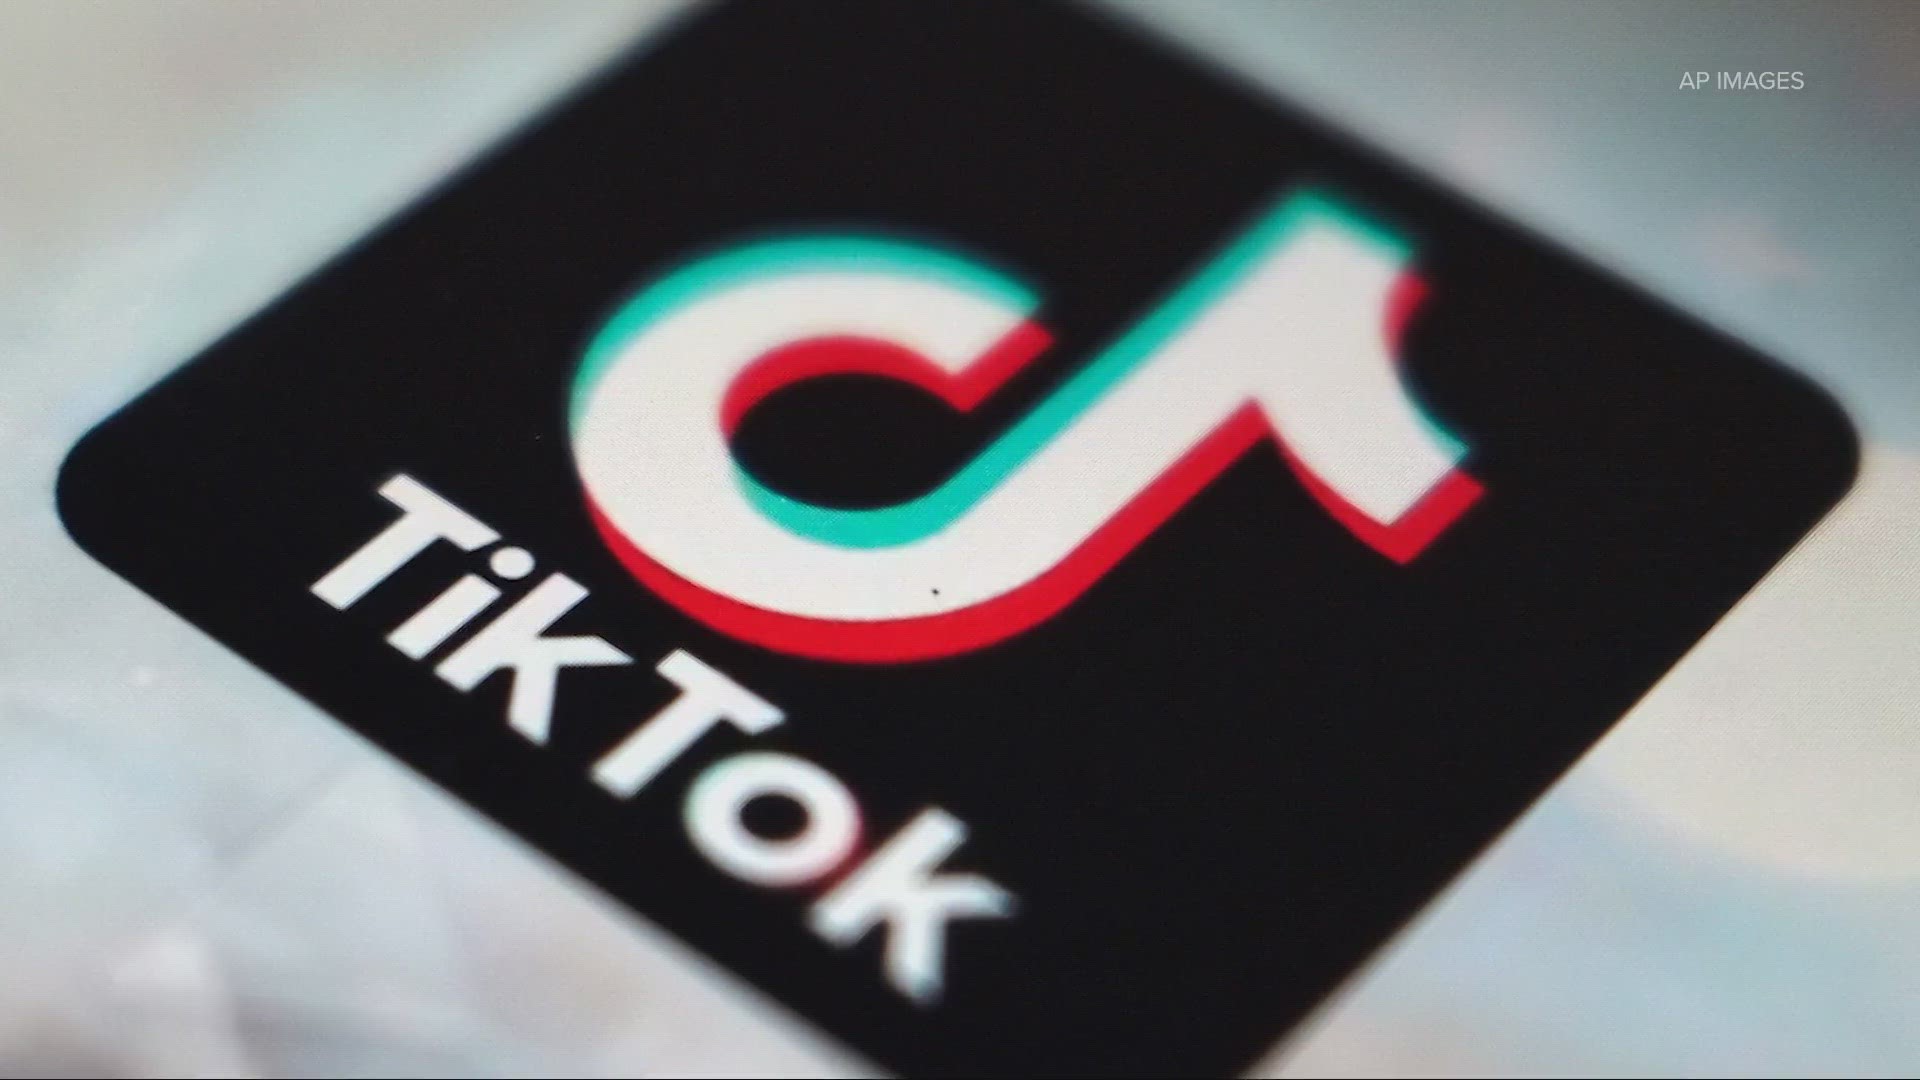 Could a bill recently introduced in Congress ban TikTok in the United States? That's the focus of this VERIFY.